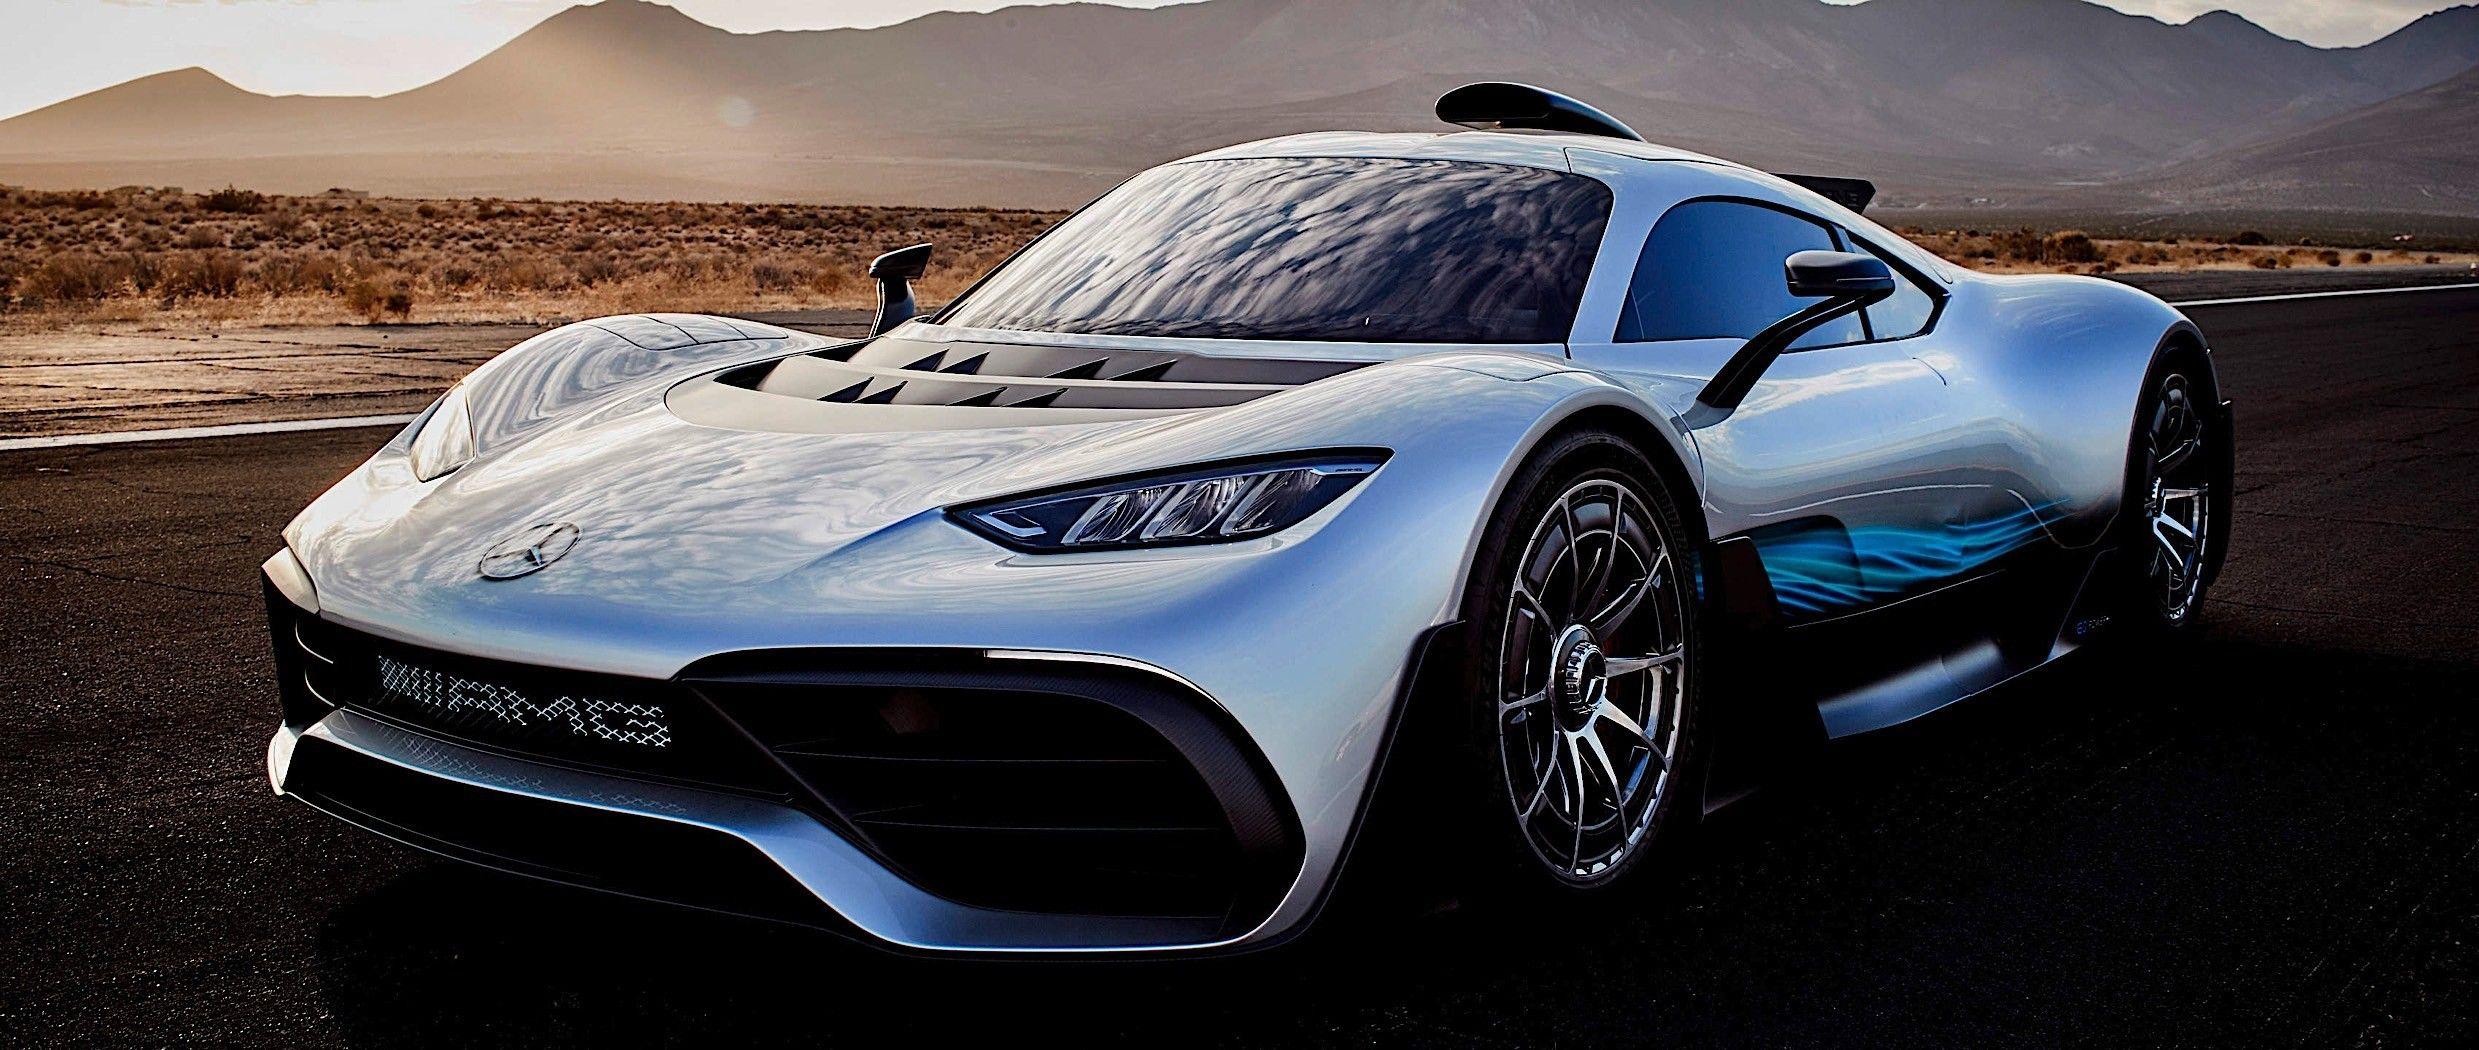 Mercedes AMG Project One Shines In New Wallpaper Gallery